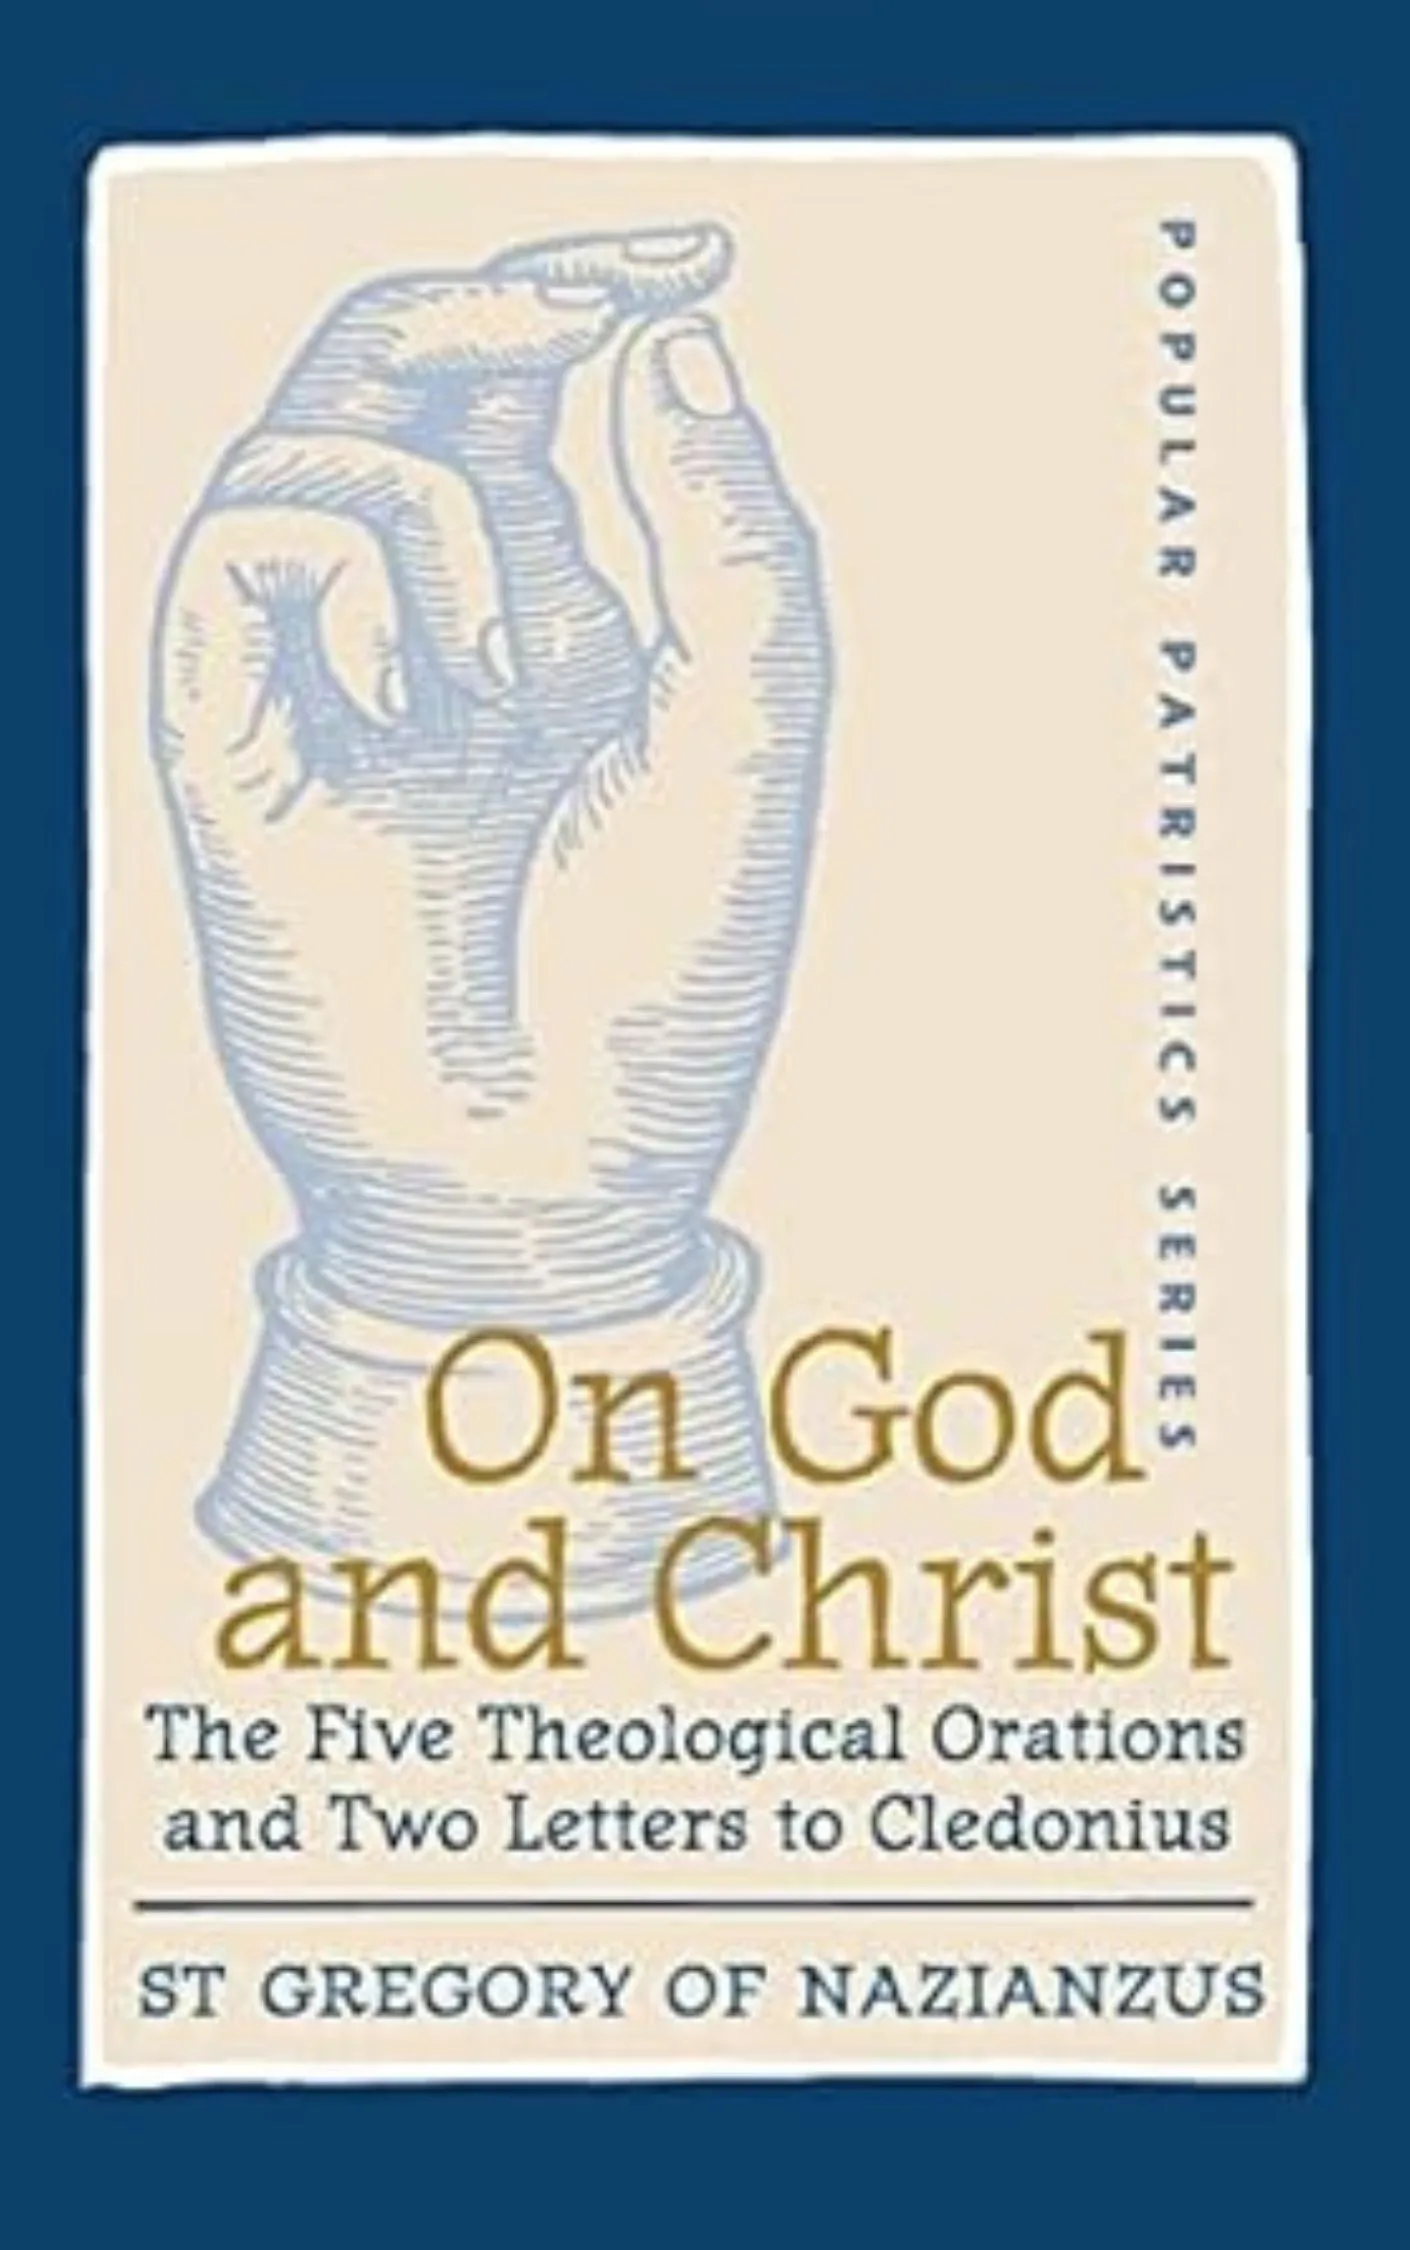 On God and Christ: The Five Theological<br />
Orations and Two Letters to Cledonius by St. Gregory of Nazianzus